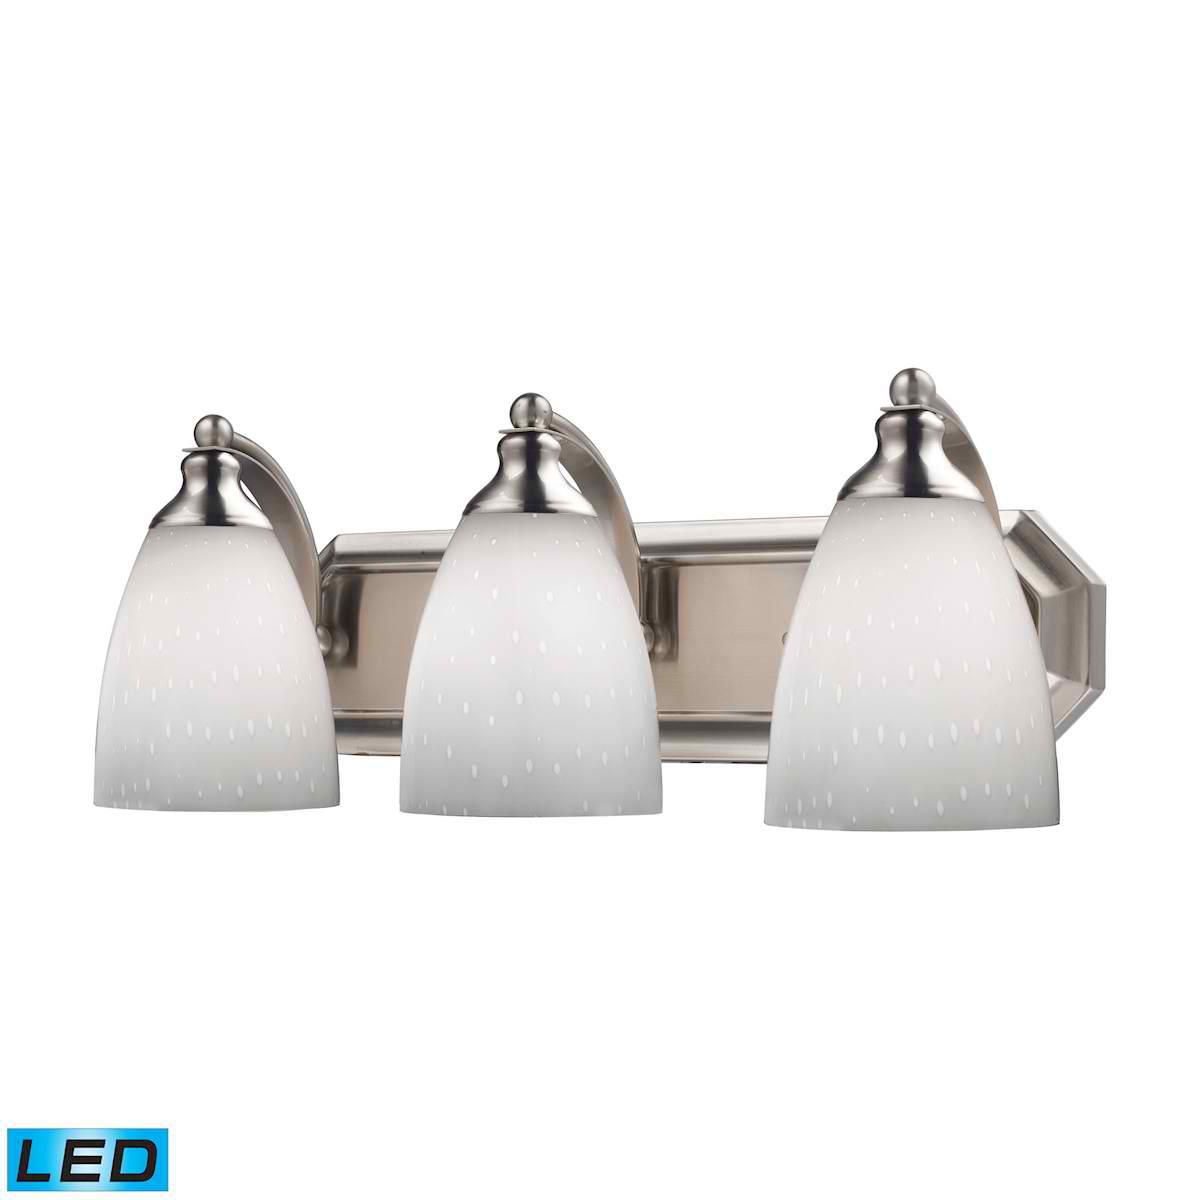 3 Light Vanity in Satin Nickel and Simply White Glass - LED, 800 Lumens (2400 Lumens Total) with Full Scale